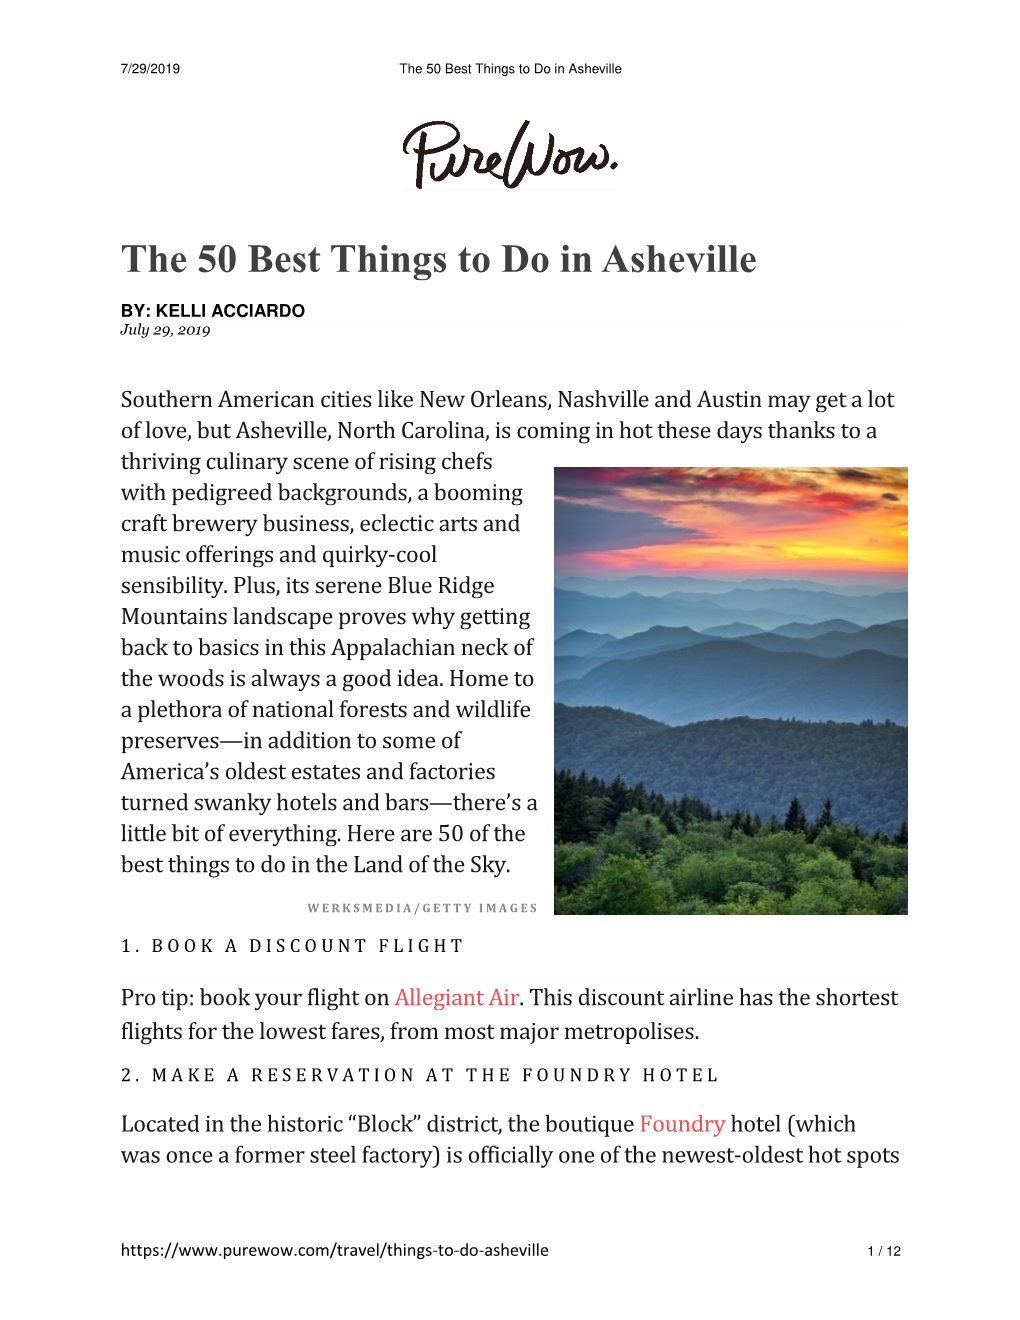 The 50 Best Things to Do in Asheville